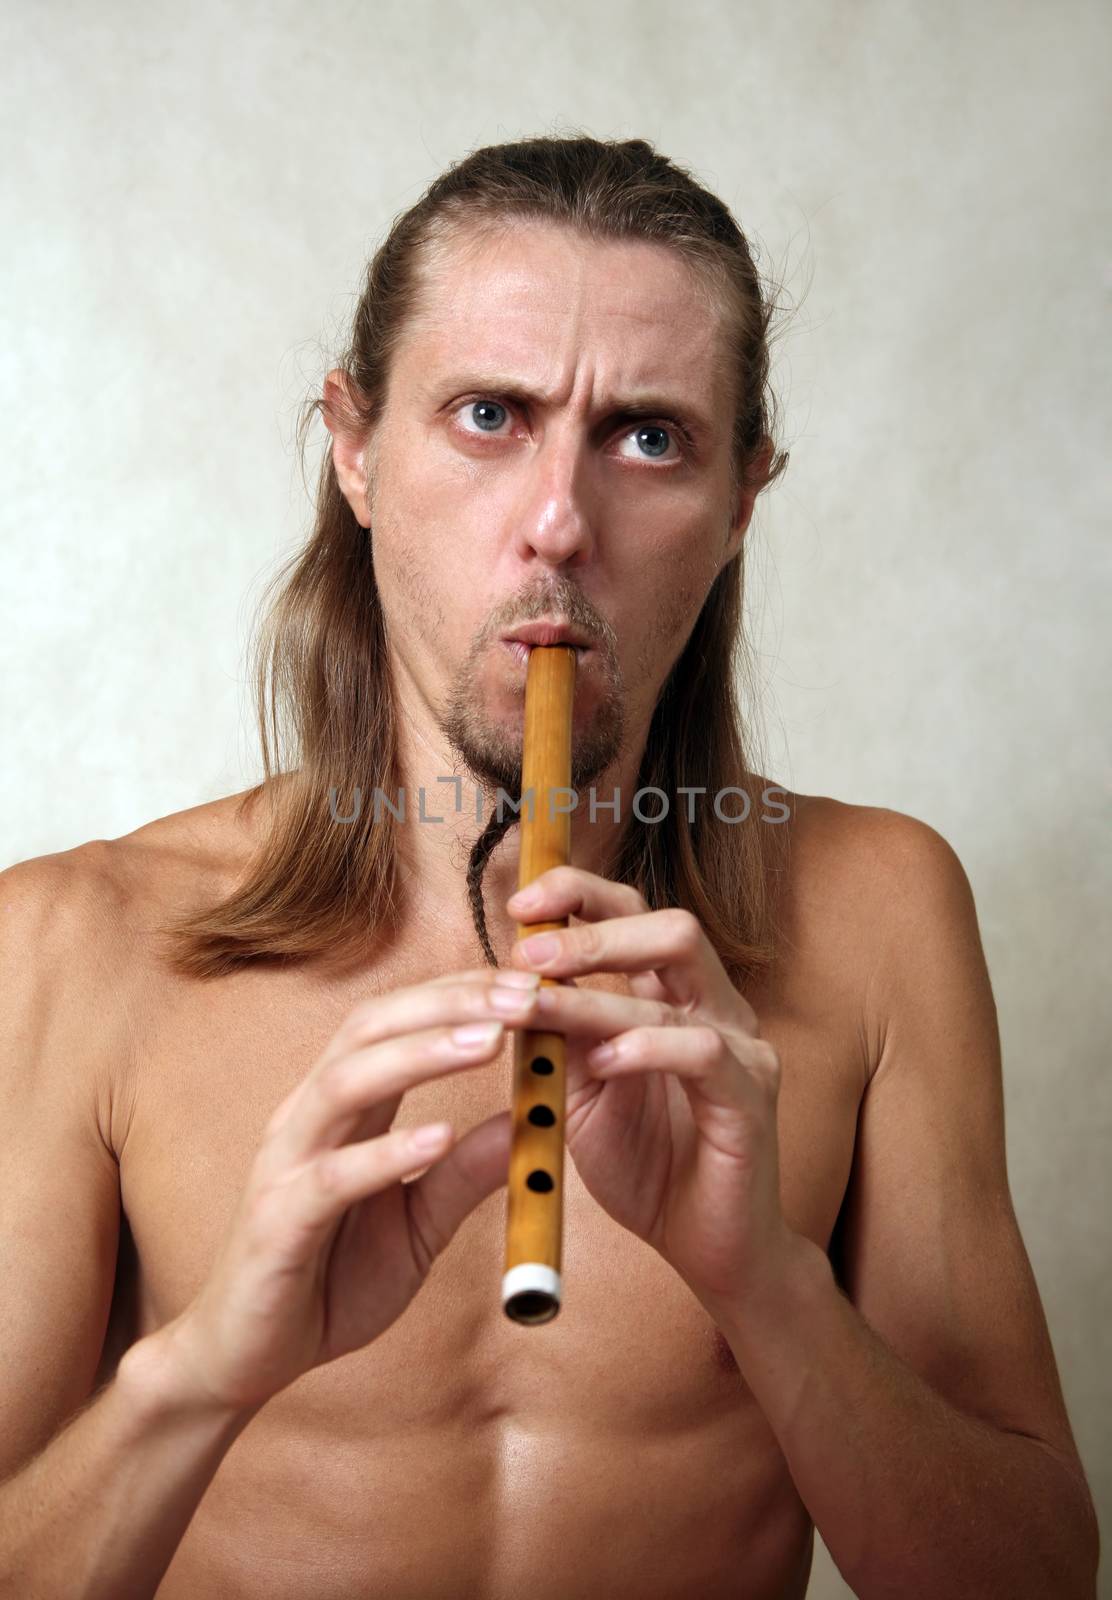 A man playing his wind instrument with expression